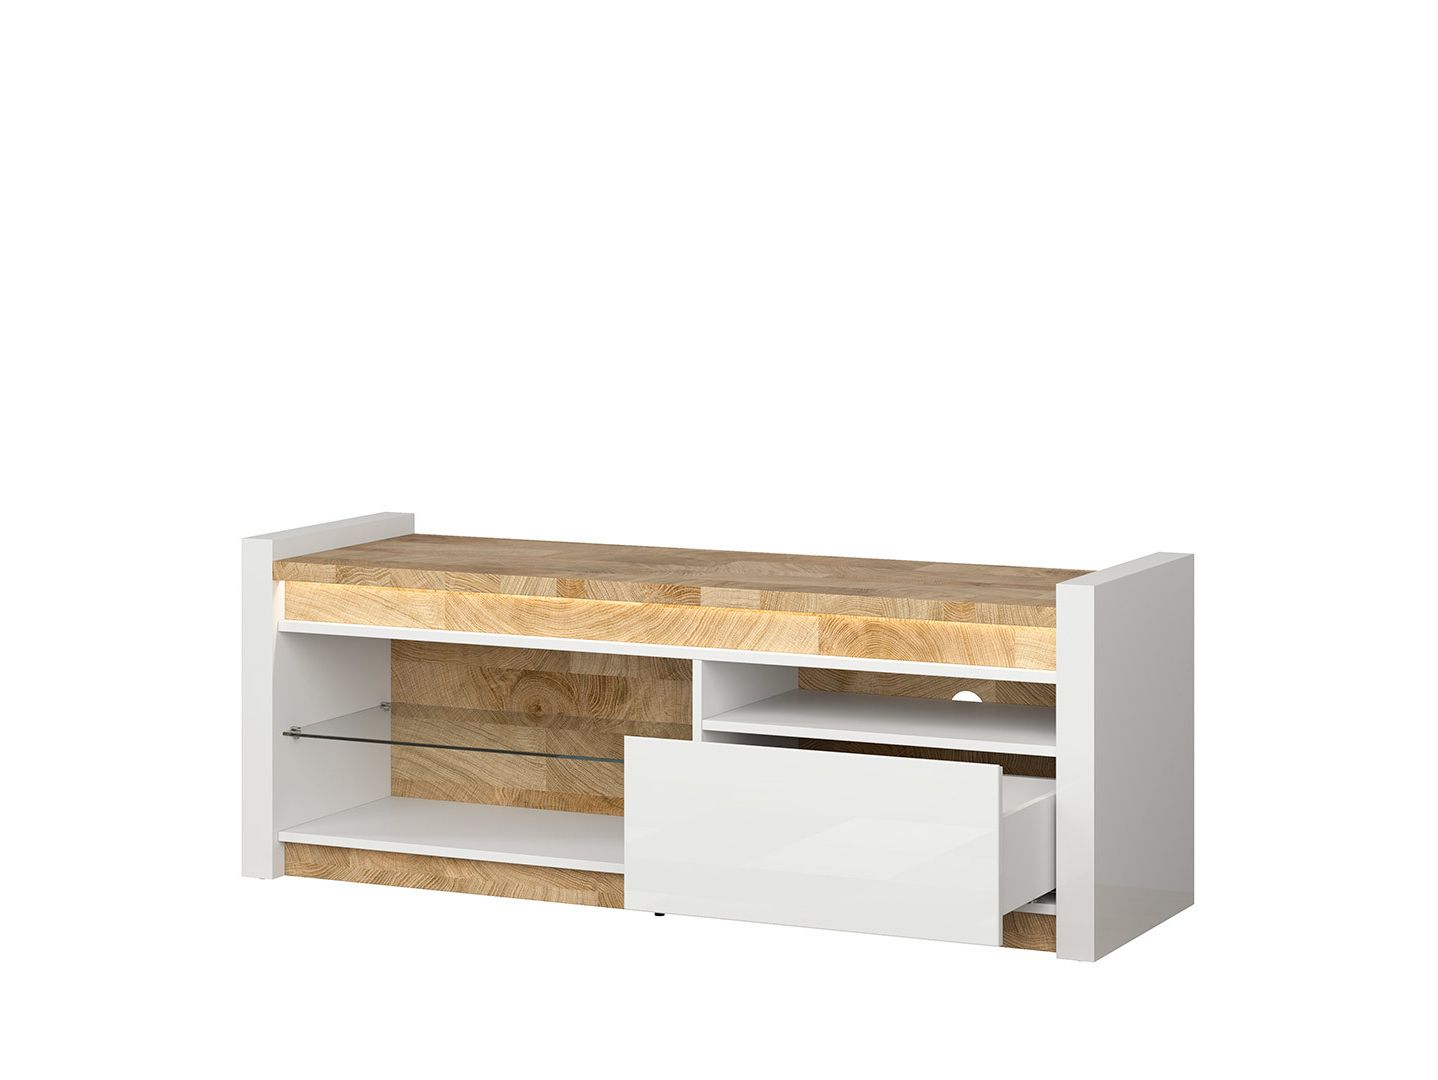 Modern White High Gloss Tv Cabinet Entertainment Unit With With Regard To Zimtown Modern Tv Stands High Gloss Media Console Cabinet With Led Shelf And Drawers (Gallery 1 of 20)